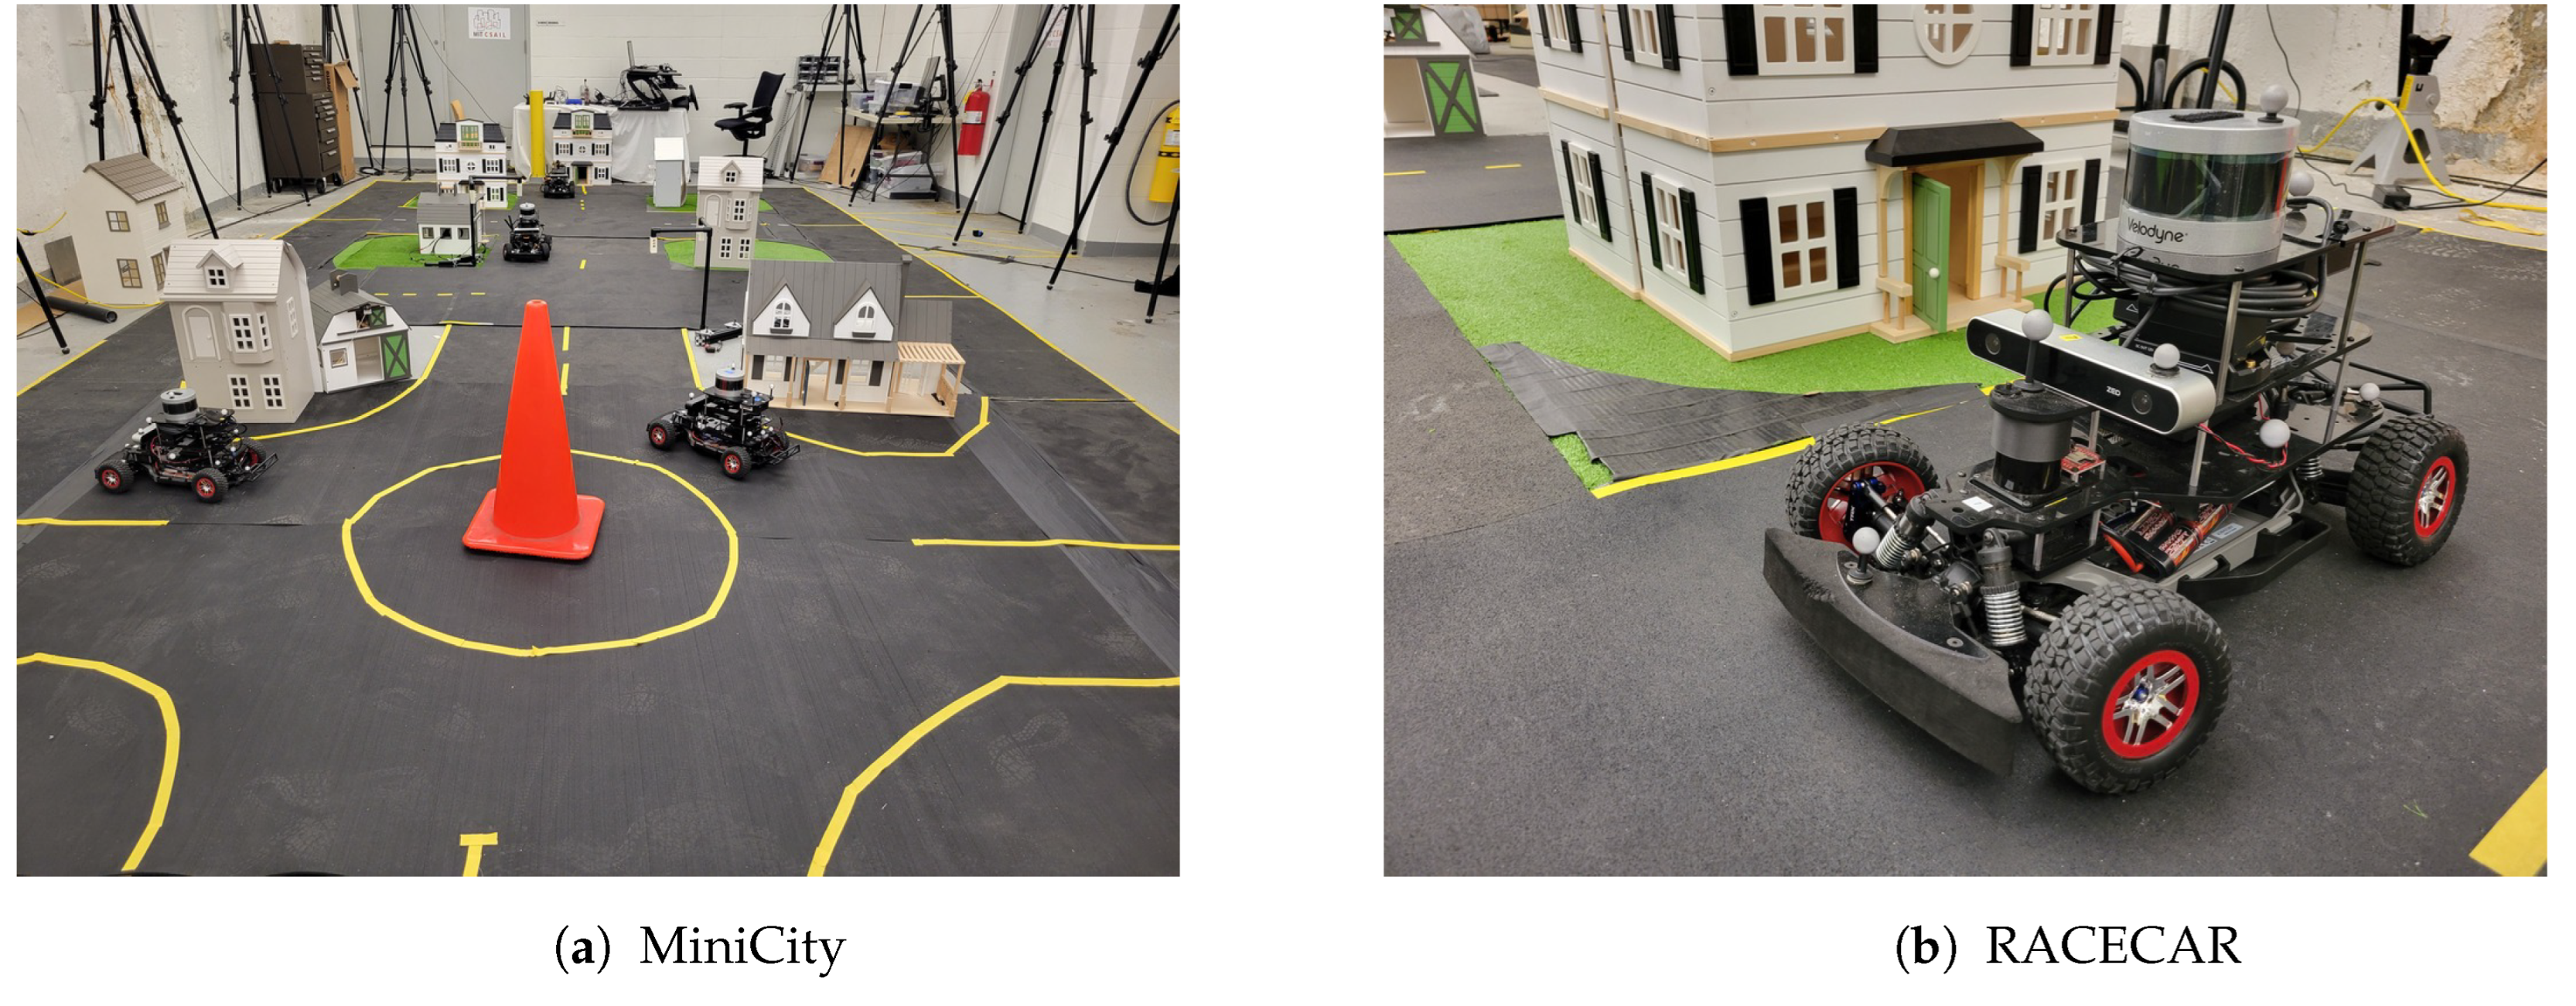 Sensors | Free Full-Text | Evaluating Autonomous Urban Perception and  Planning in a 1/10th Scale MiniCity